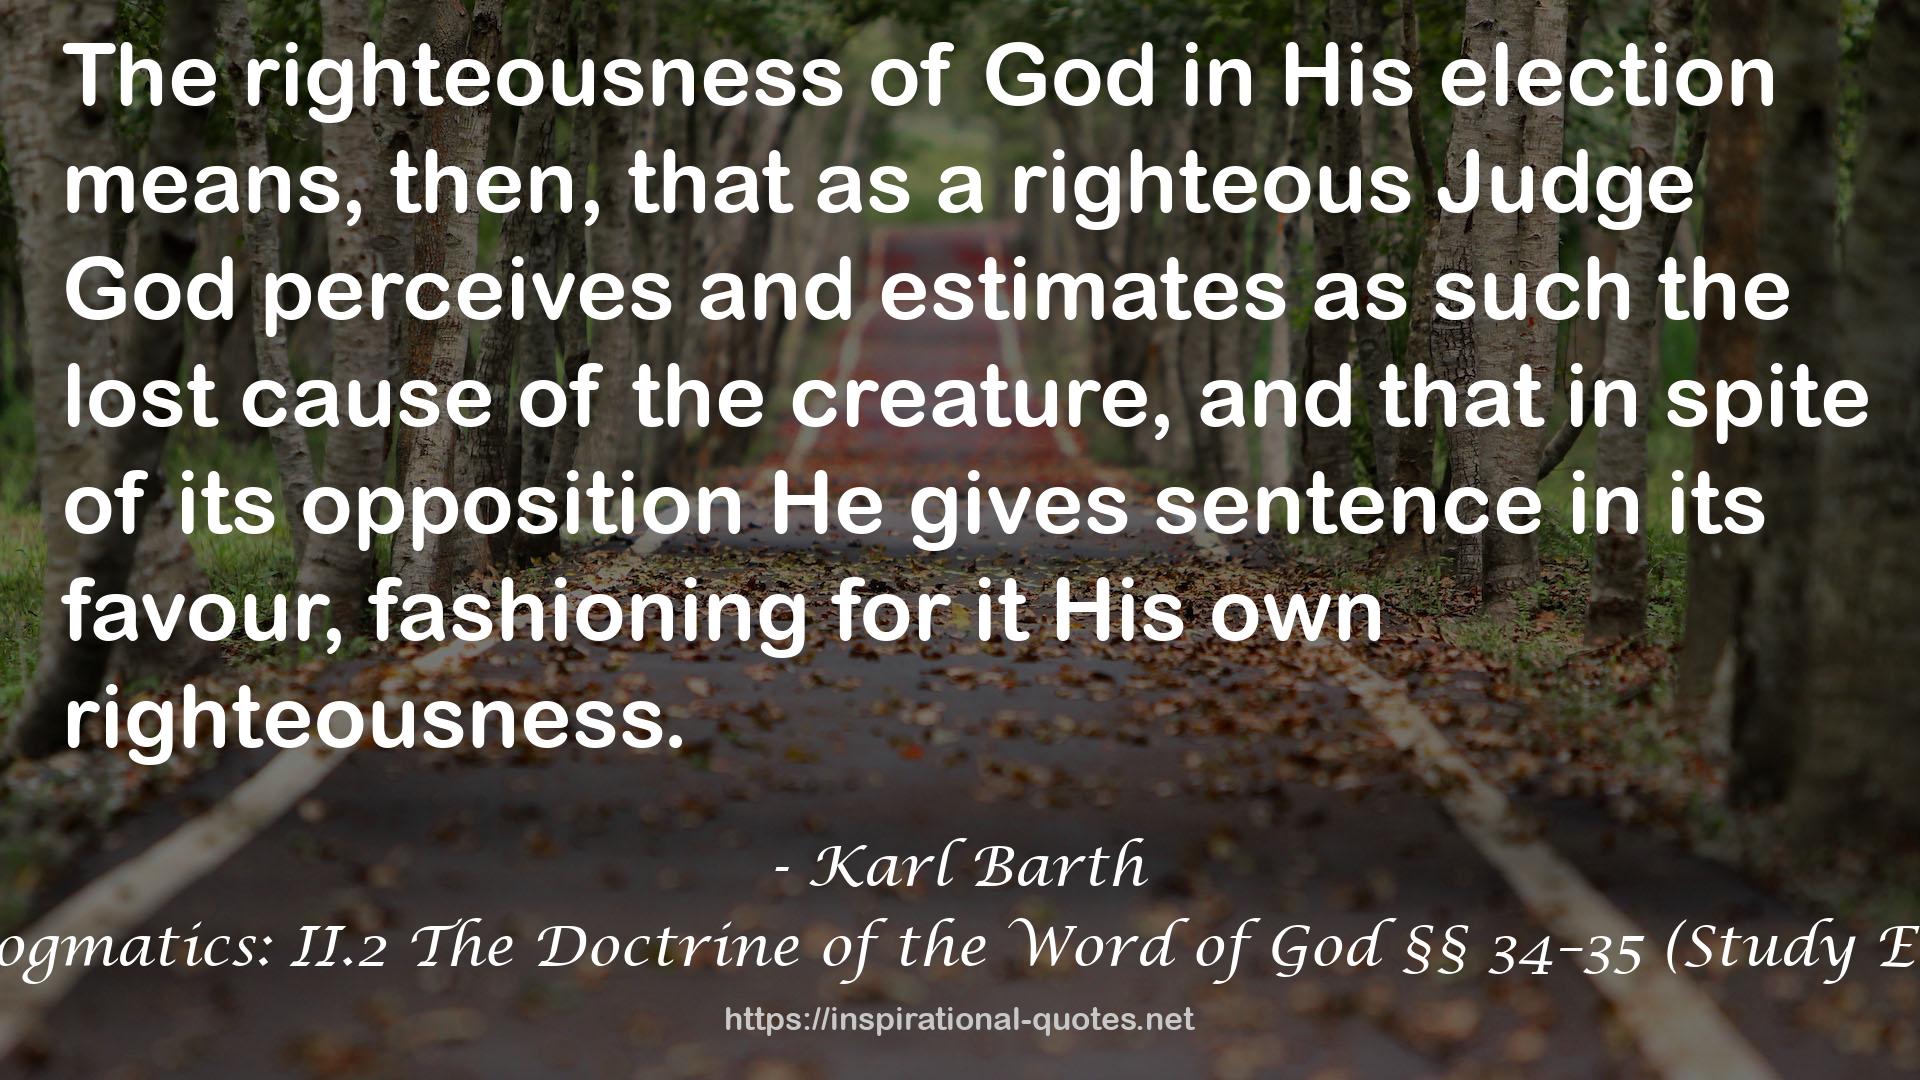 Church Dogmatics: II.2 The Doctrine of the Word of God §§ 34–35 (Study Edition #11) QUOTES